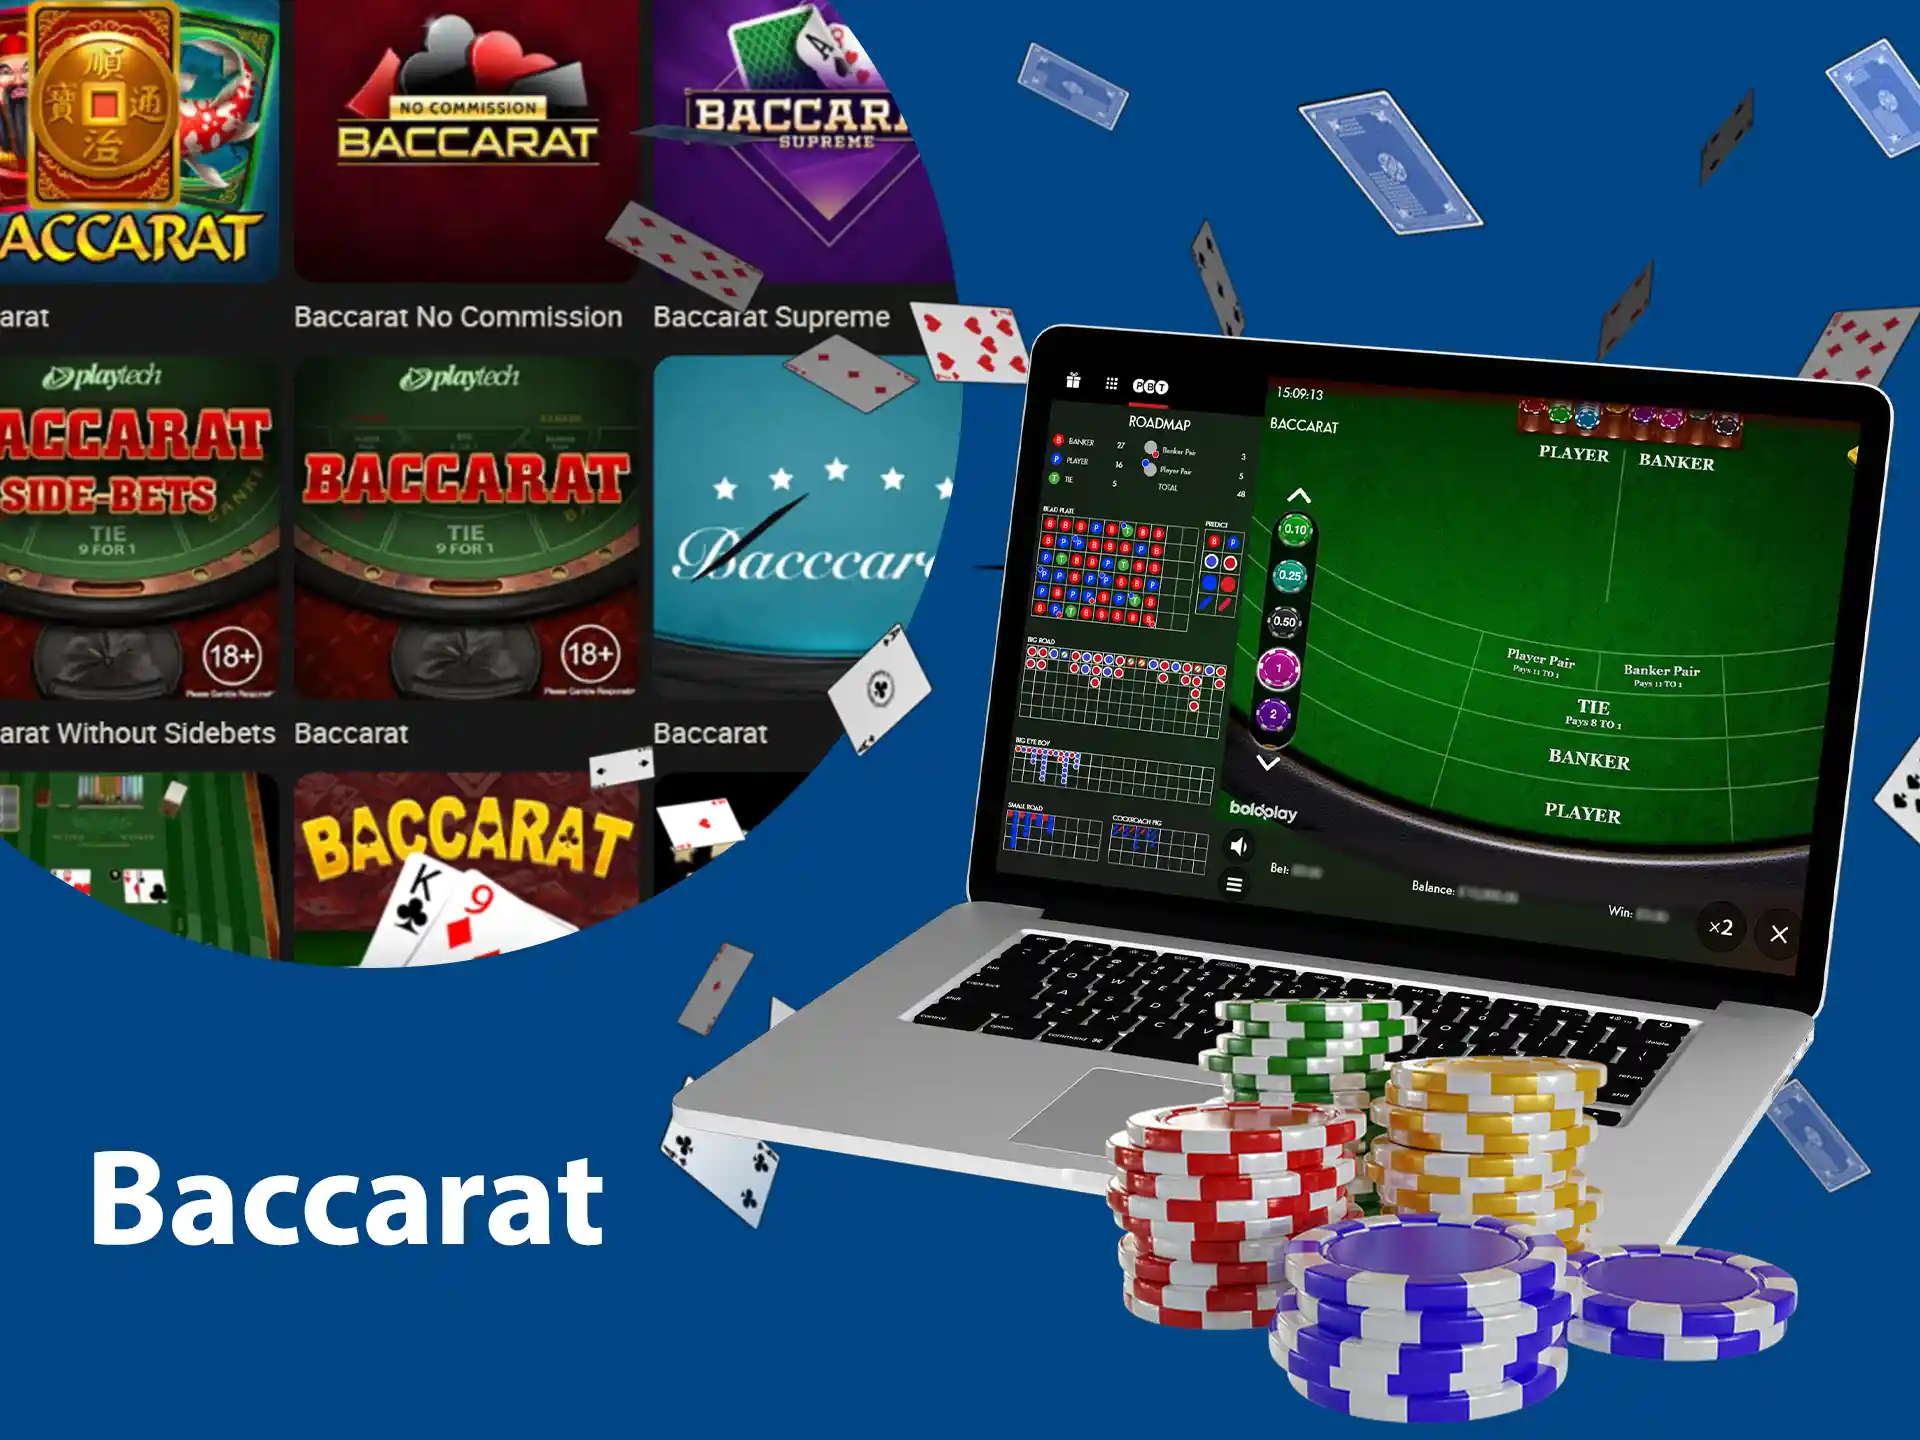 The Baccarat card game gives casino players a good opportunity to win.